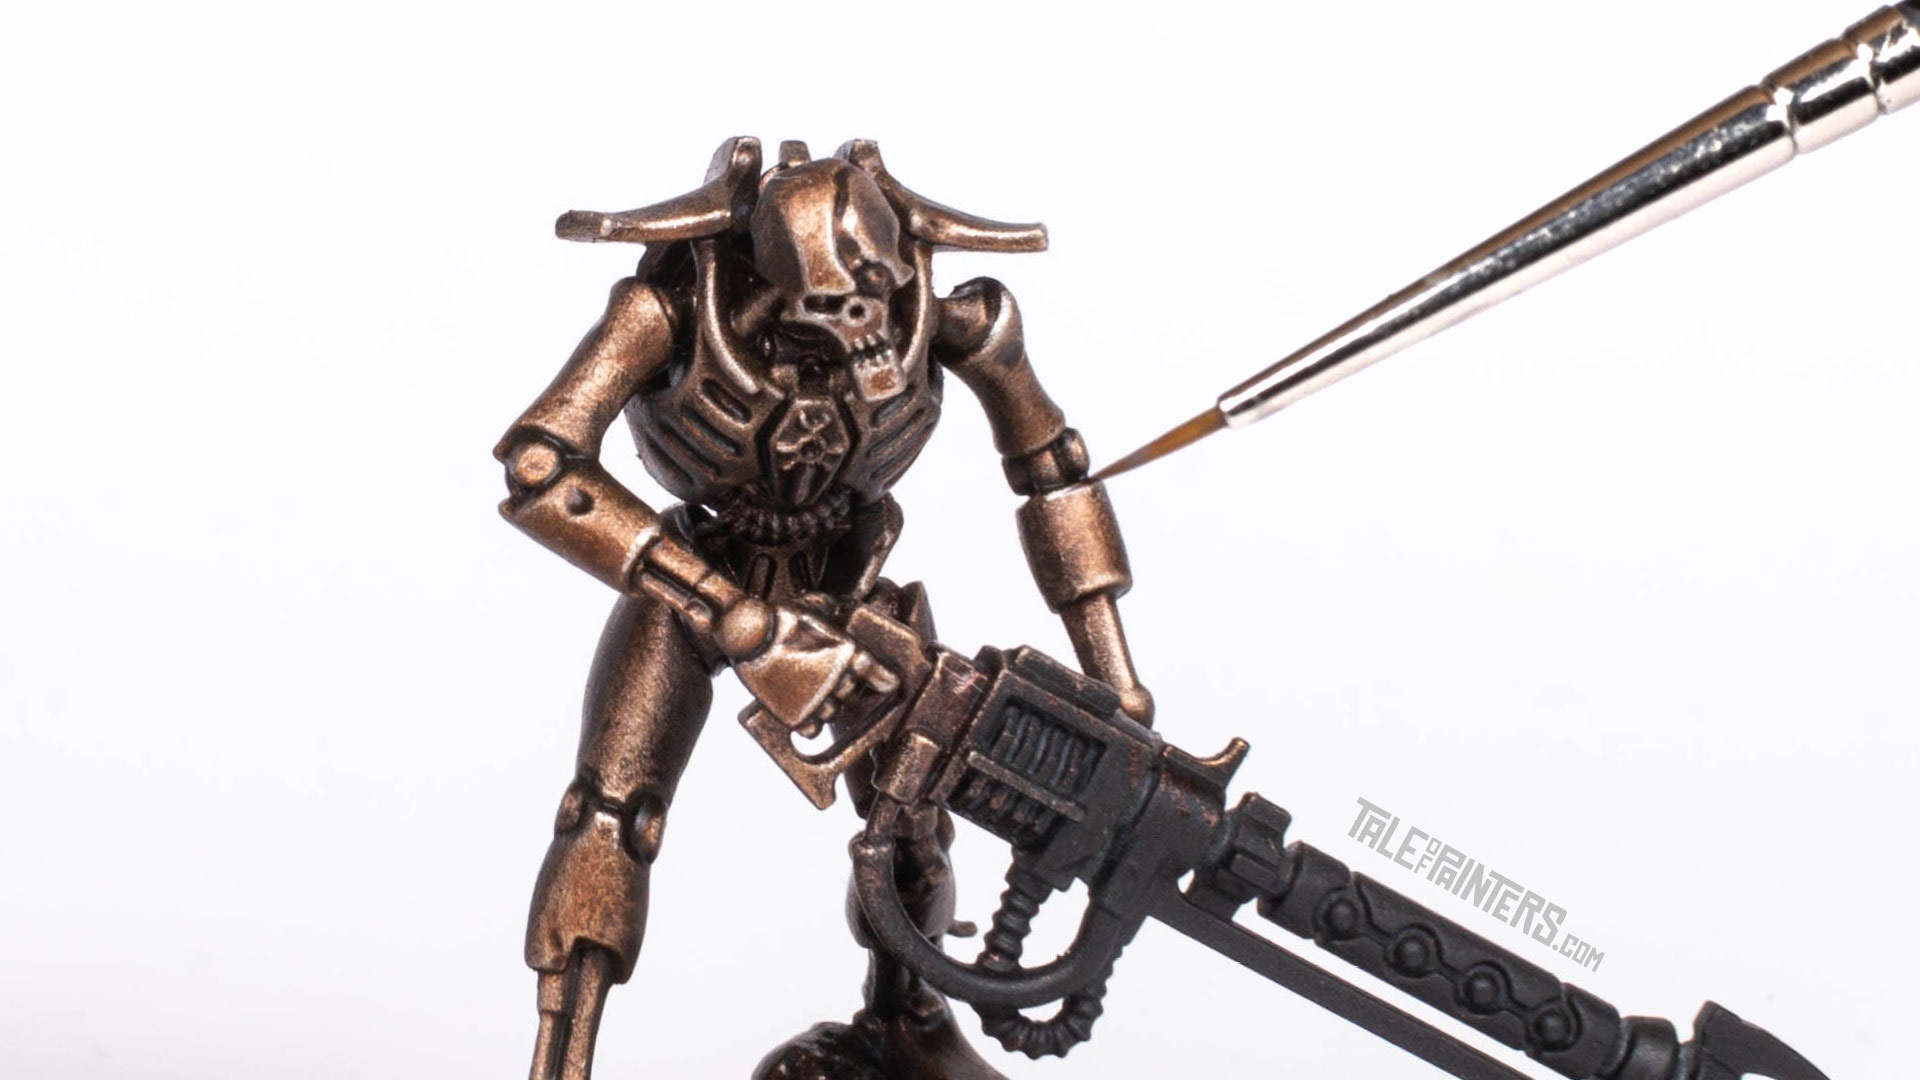 Tutorial: How to paint Necrons Szarekhan armour - featured image